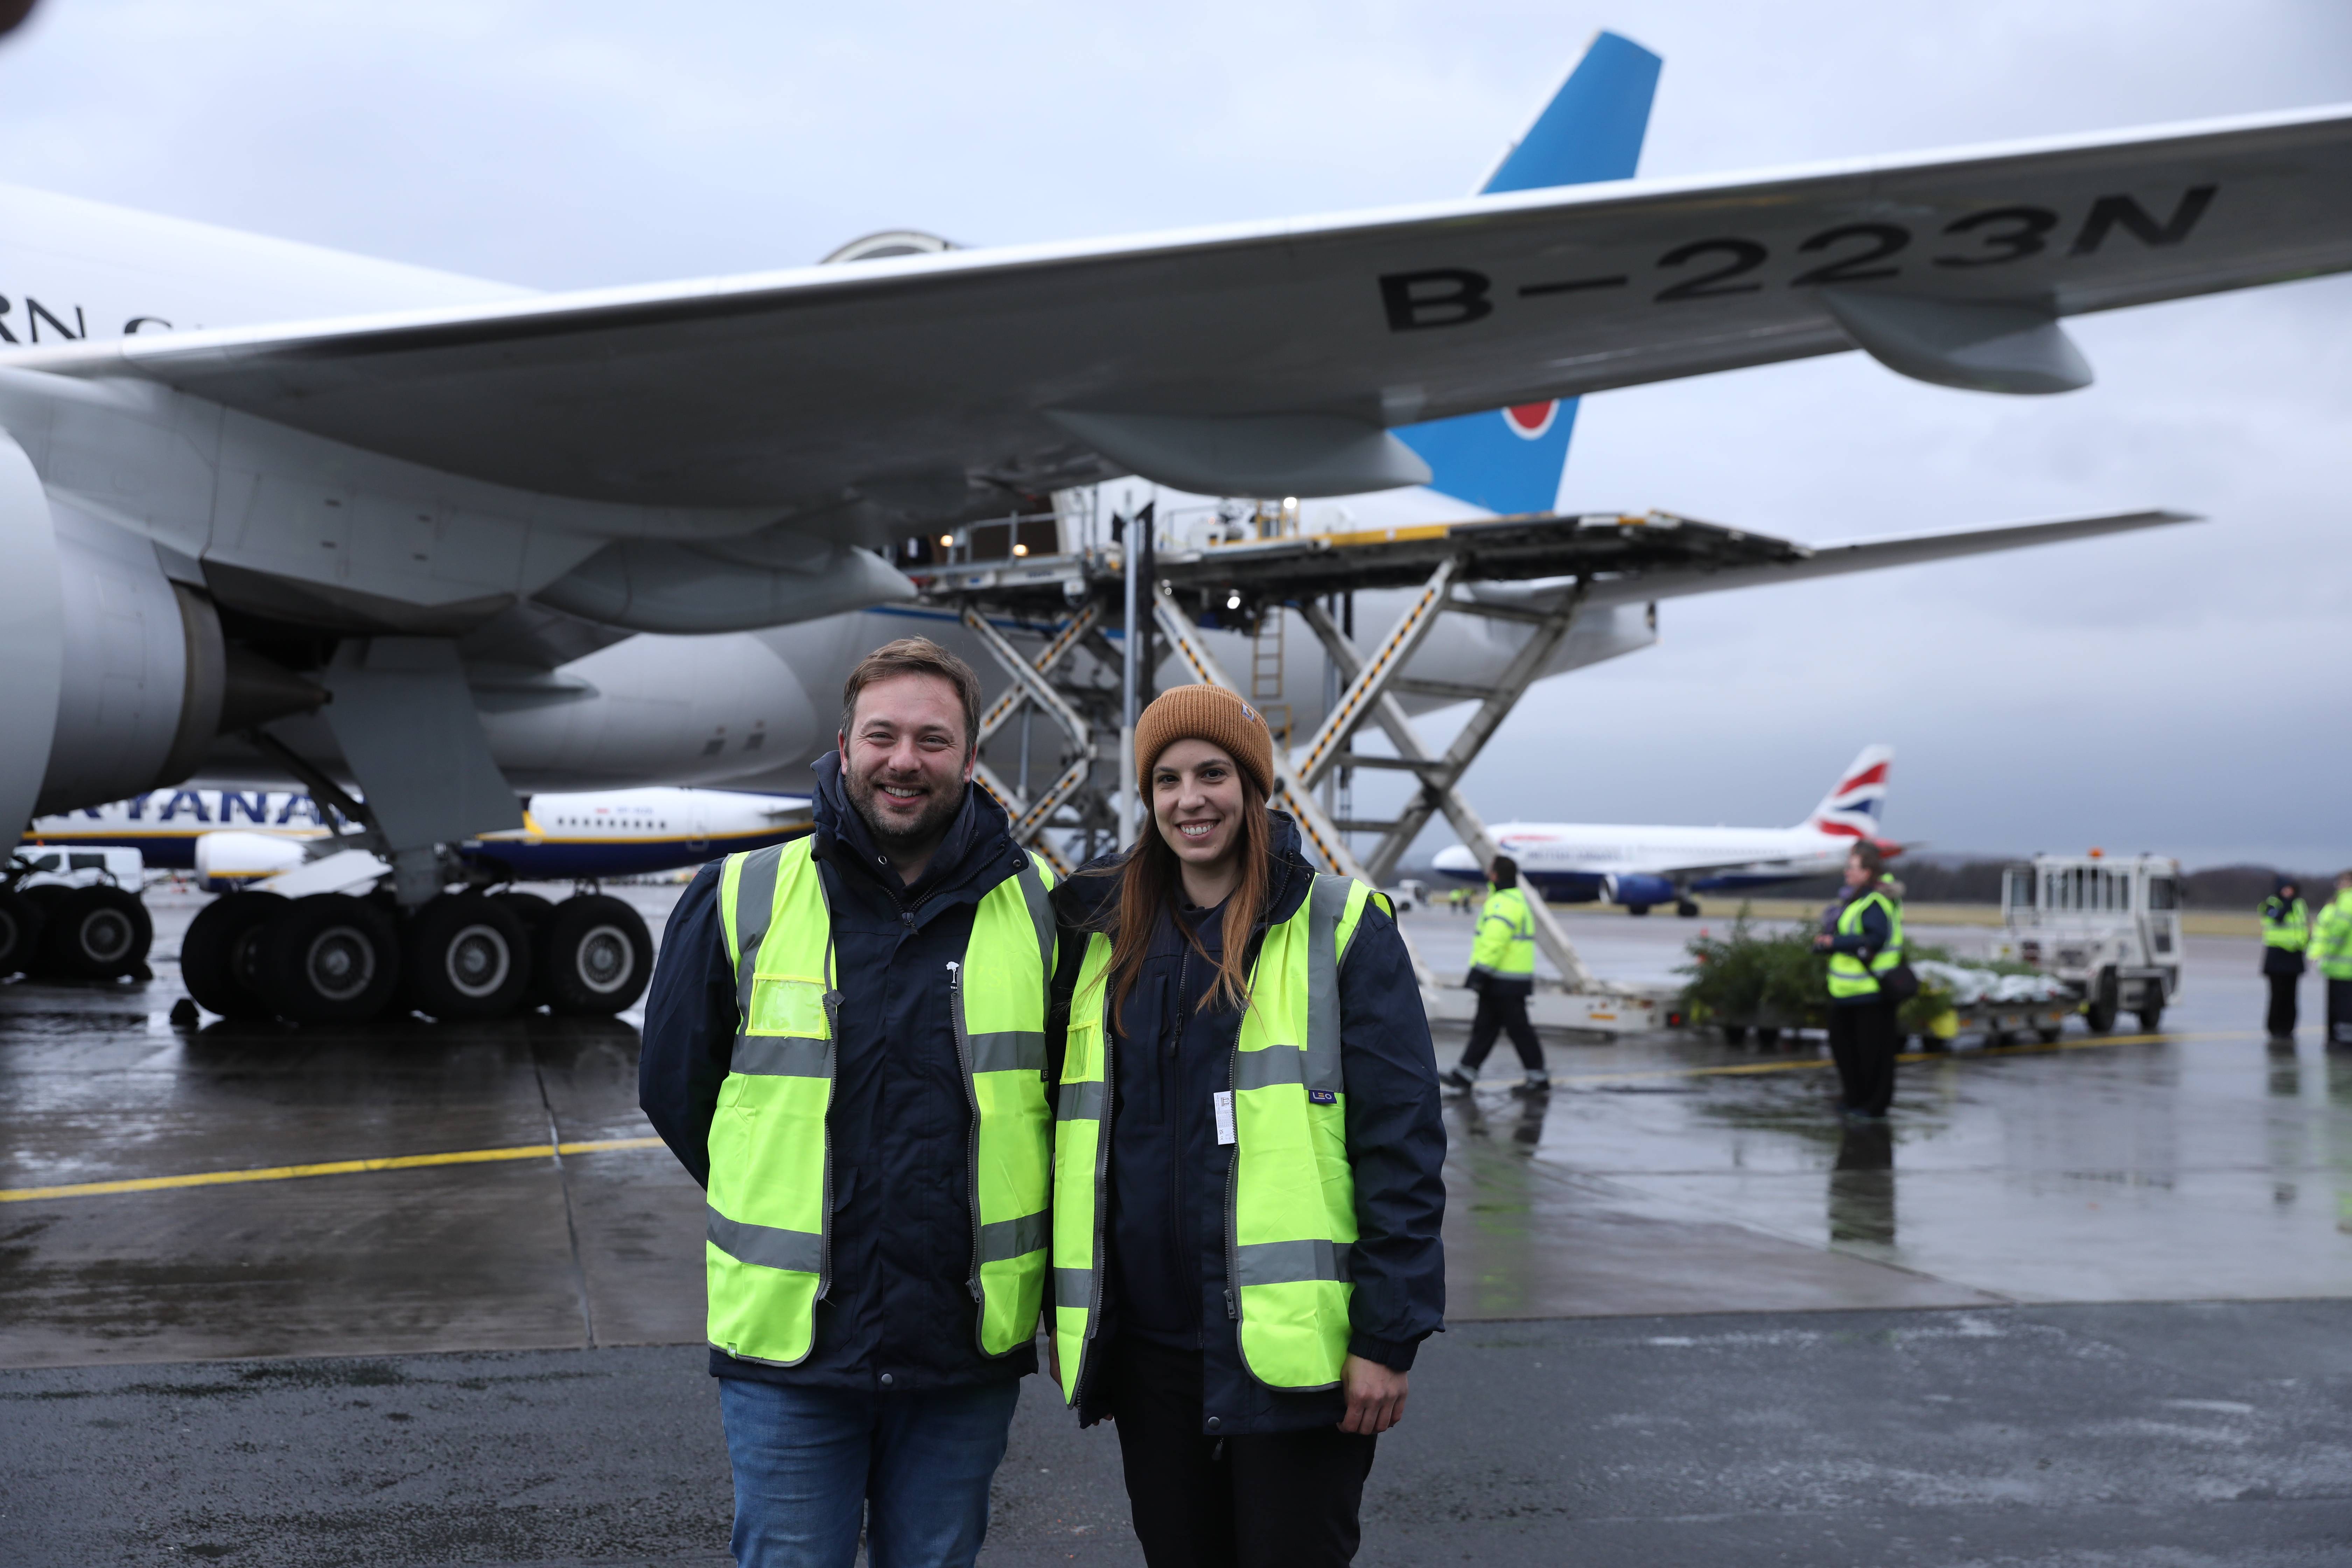 Carnivore Keeper Michael Livingstone and Vet Stephanie Mota pose together smiling in high vis in front of plane taking the panda pair to China